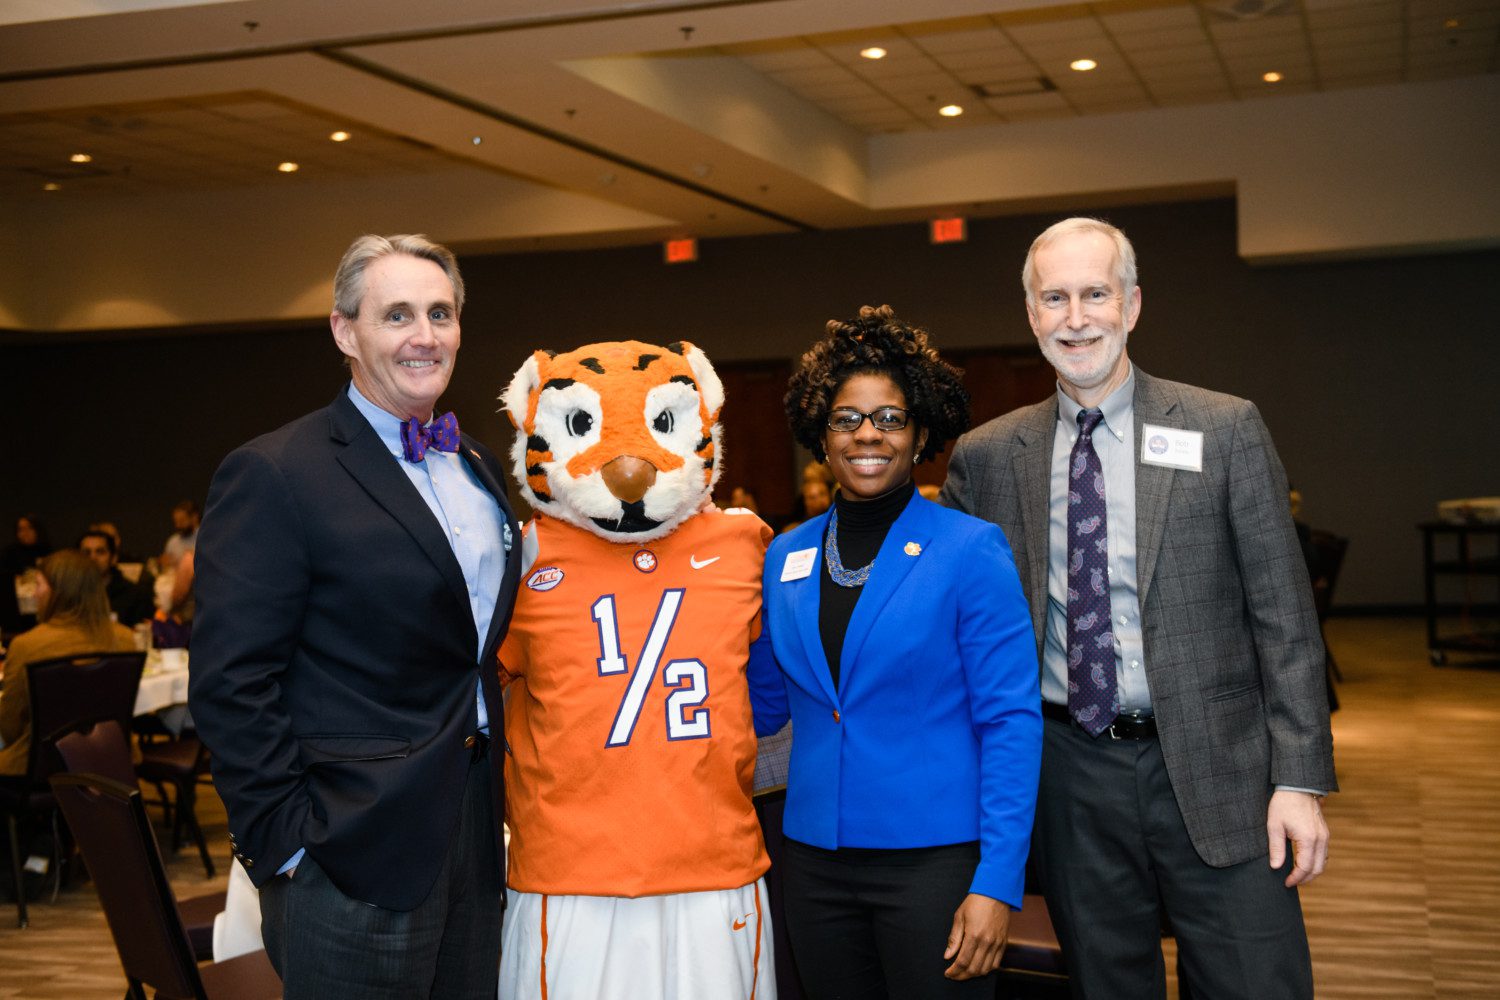 Provost Bob Jones takes a picture with the Tiger mascot and two Clemson employees.